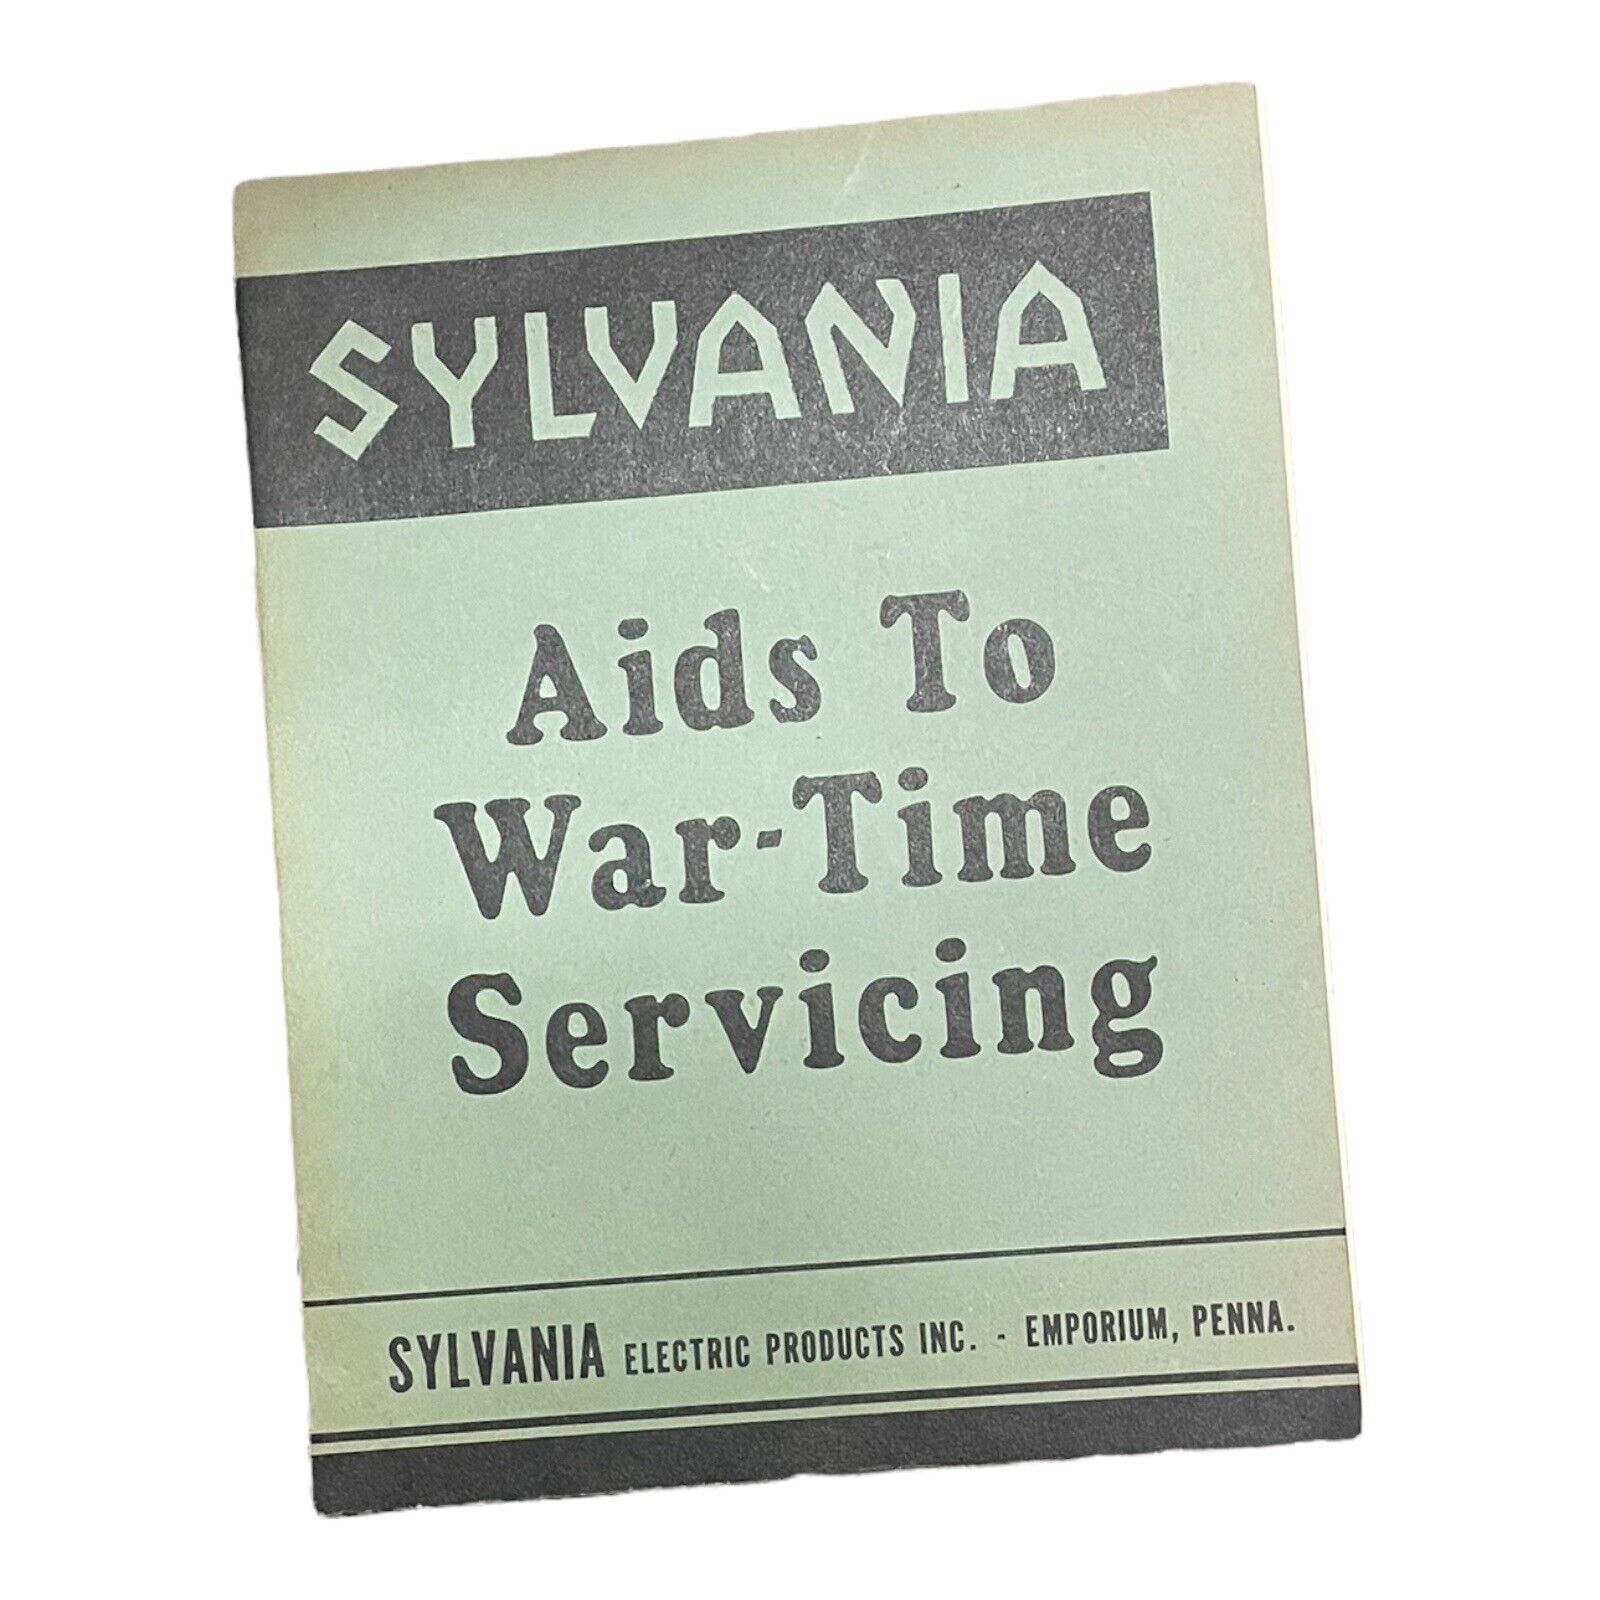 Sylvania Aids to War Time Servicing WWII Radio Repair Guide 1945 Electric 20 Pgs